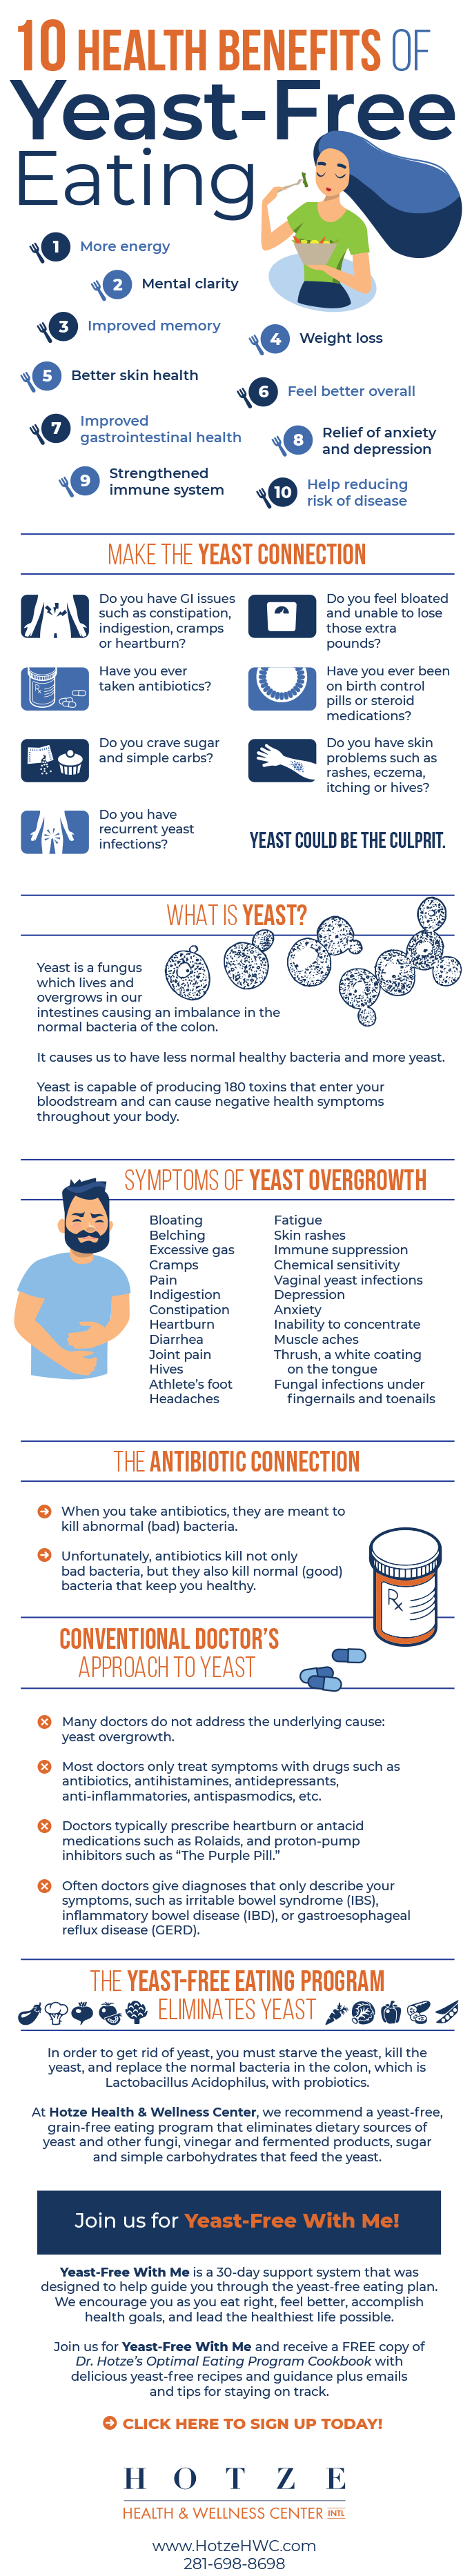 benefits of yeast-free eating infographic